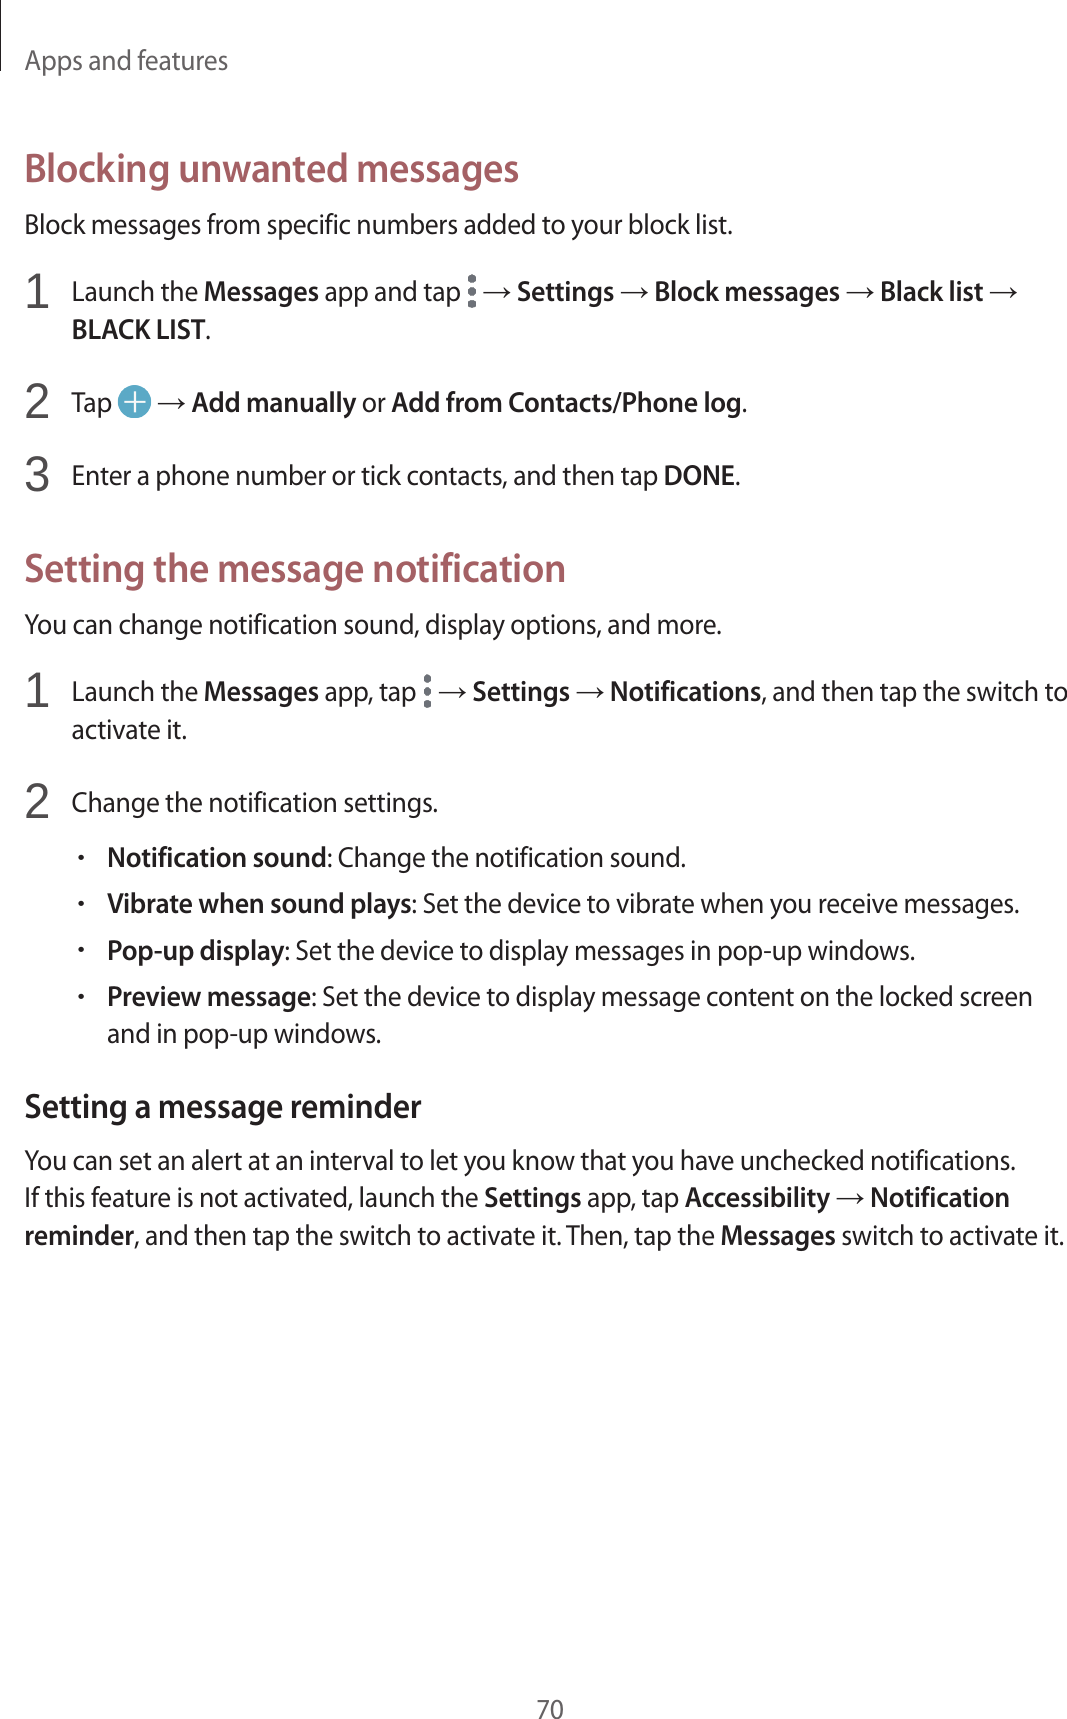 Apps and features70Blocking unwanted messagesBlock messages from specific numbers added to your block list.1  Launch the Messages app and tap   → Settings → Block messages → Black list →BLACK LIST.2  Tap   → Add manually or Add from Contacts/Phone log.3  Enter a phone number or tick contacts, and then tap DONE.Setting the message notificationYou can change notification sound, display options, and more.1  Launch the Messages app, tap   → Settings → Notifications, and then tap the switch toactivate it.2  Change the notification settings.•Notification sound: Change the notification sound.•Vibrate when sound plays: Set the device to vibrate when you receive messages.•Pop-up display: Set the device to display messages in pop-up windows.•Preview message: Set the device to display message content on the locked screenand in pop-up windows.Setting a message reminderYou can set an alert at an interval to let you know that you have unchecked notifications. If this feature is not activated, launch the Settings app, tap Accessibility → Notification reminder, and then tap the switch to activate it. Then, tap the Messages switch to activate it.